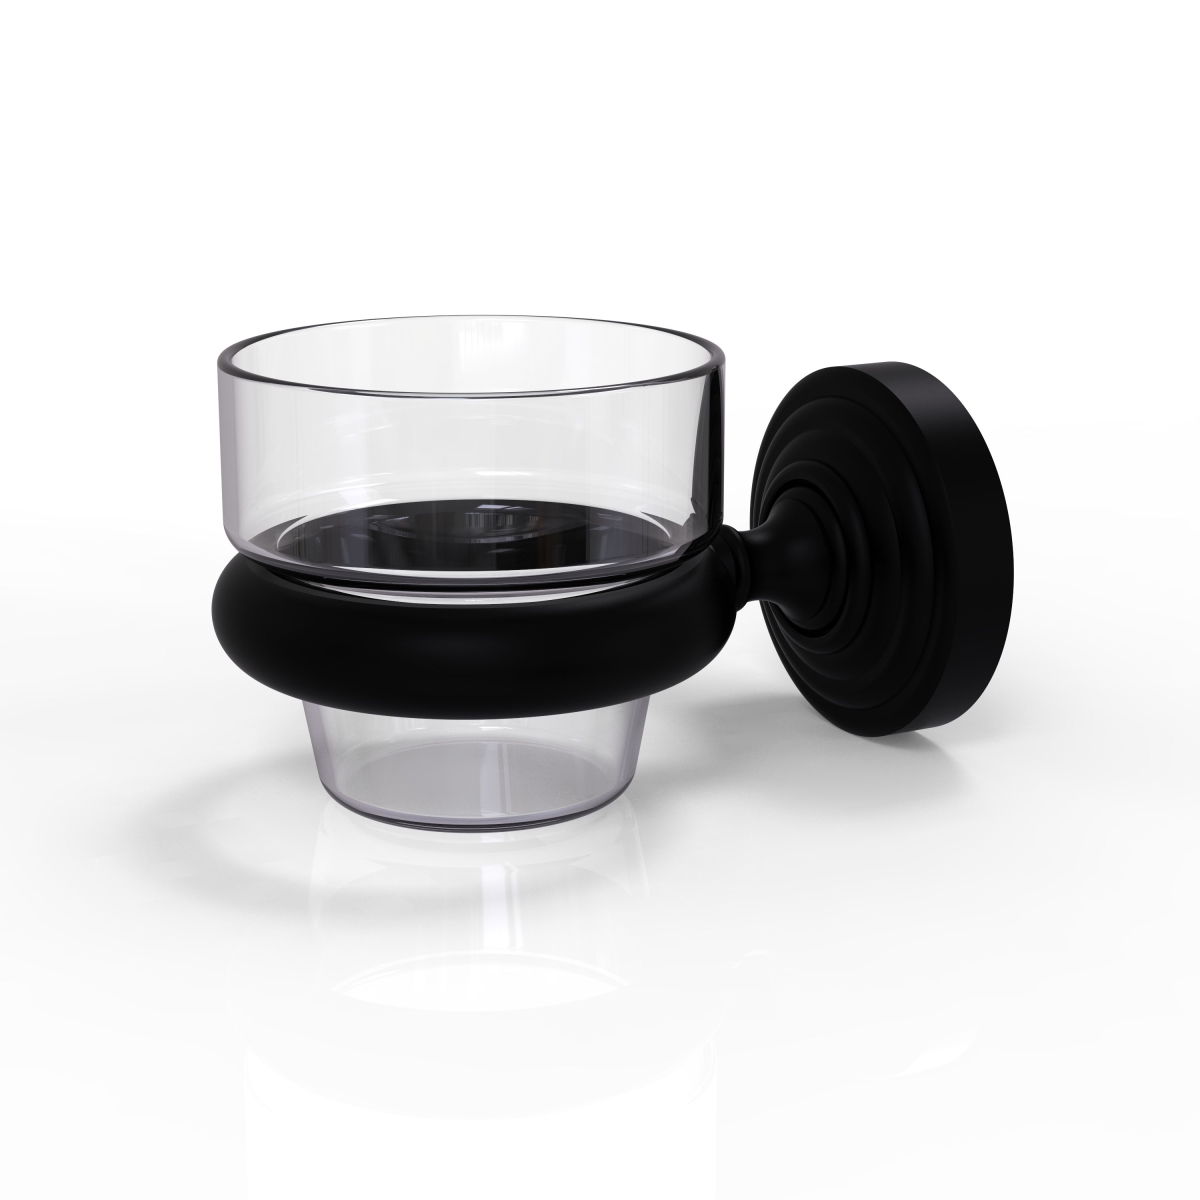 Wp-64-bkm Waverly Place Collection Wall Mounted Votive Candle Holder, Matte Black